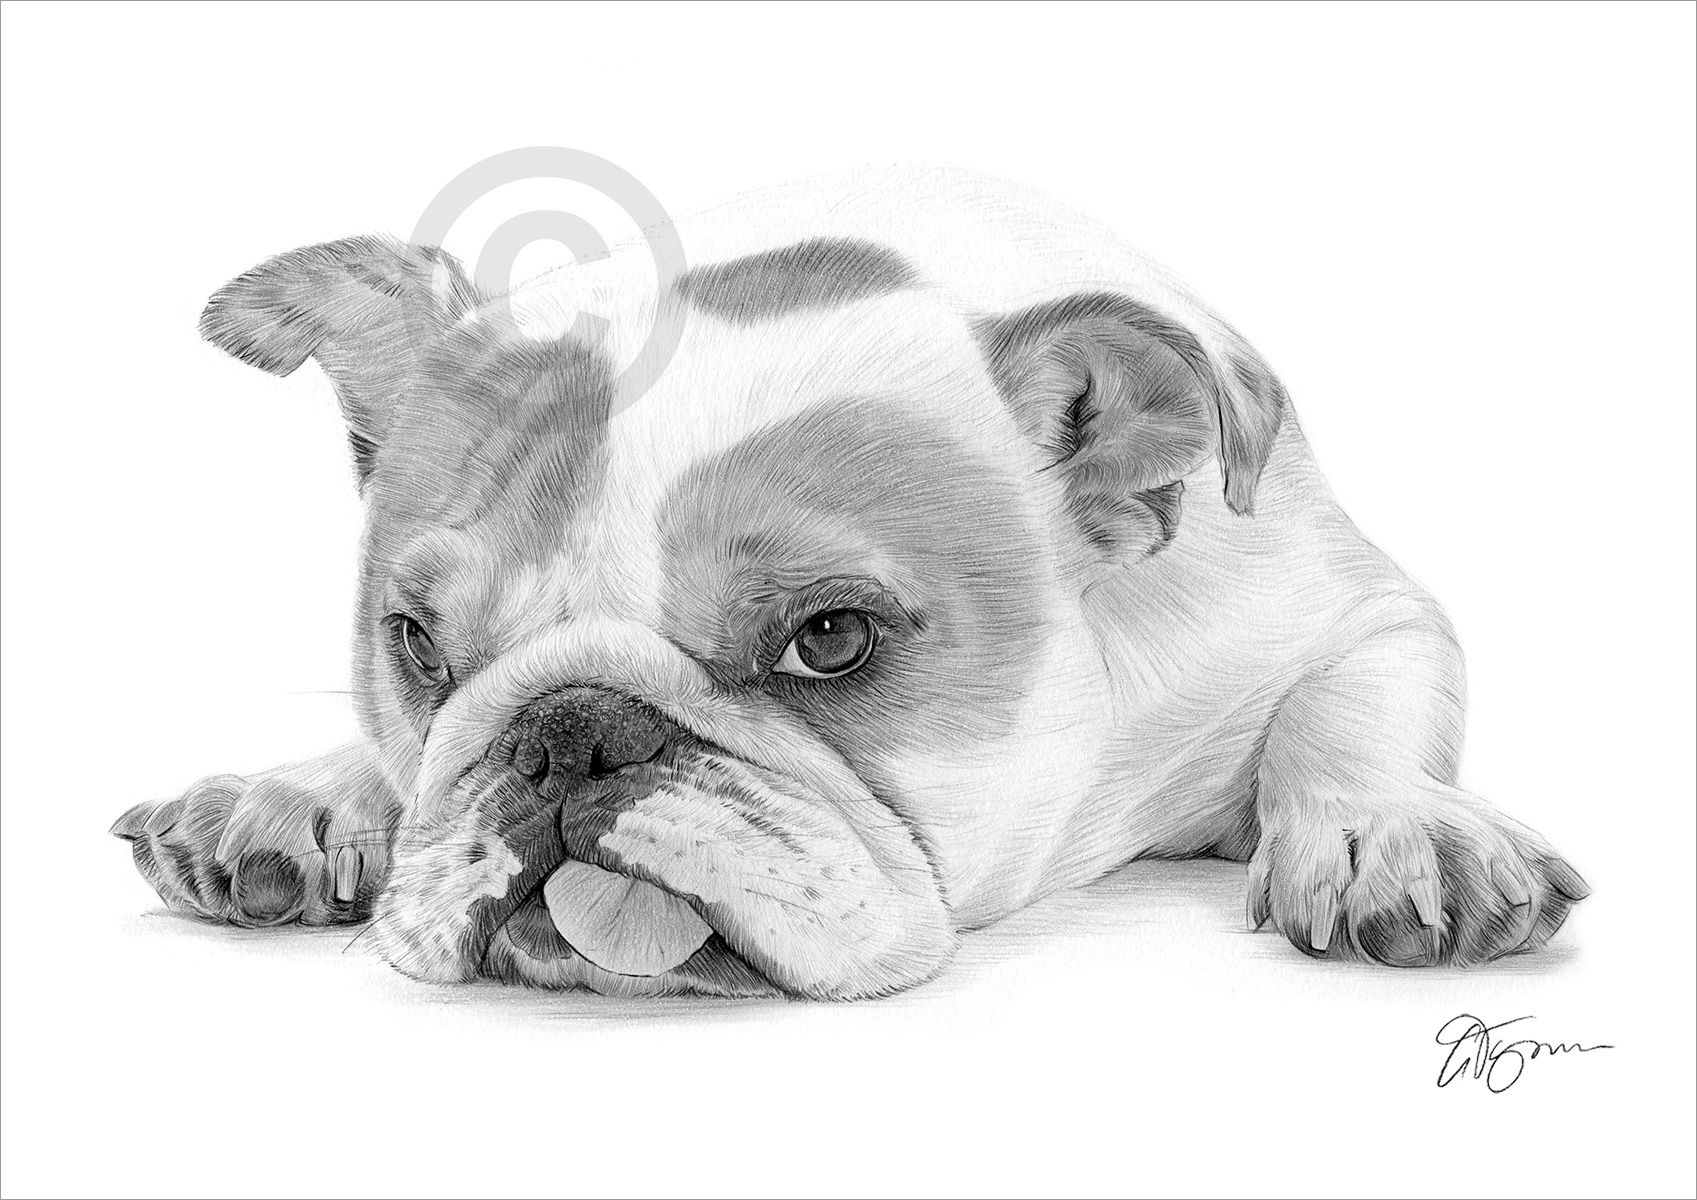 Pencil drawing of a young English Bulldog puppy by artist Gary Tymon